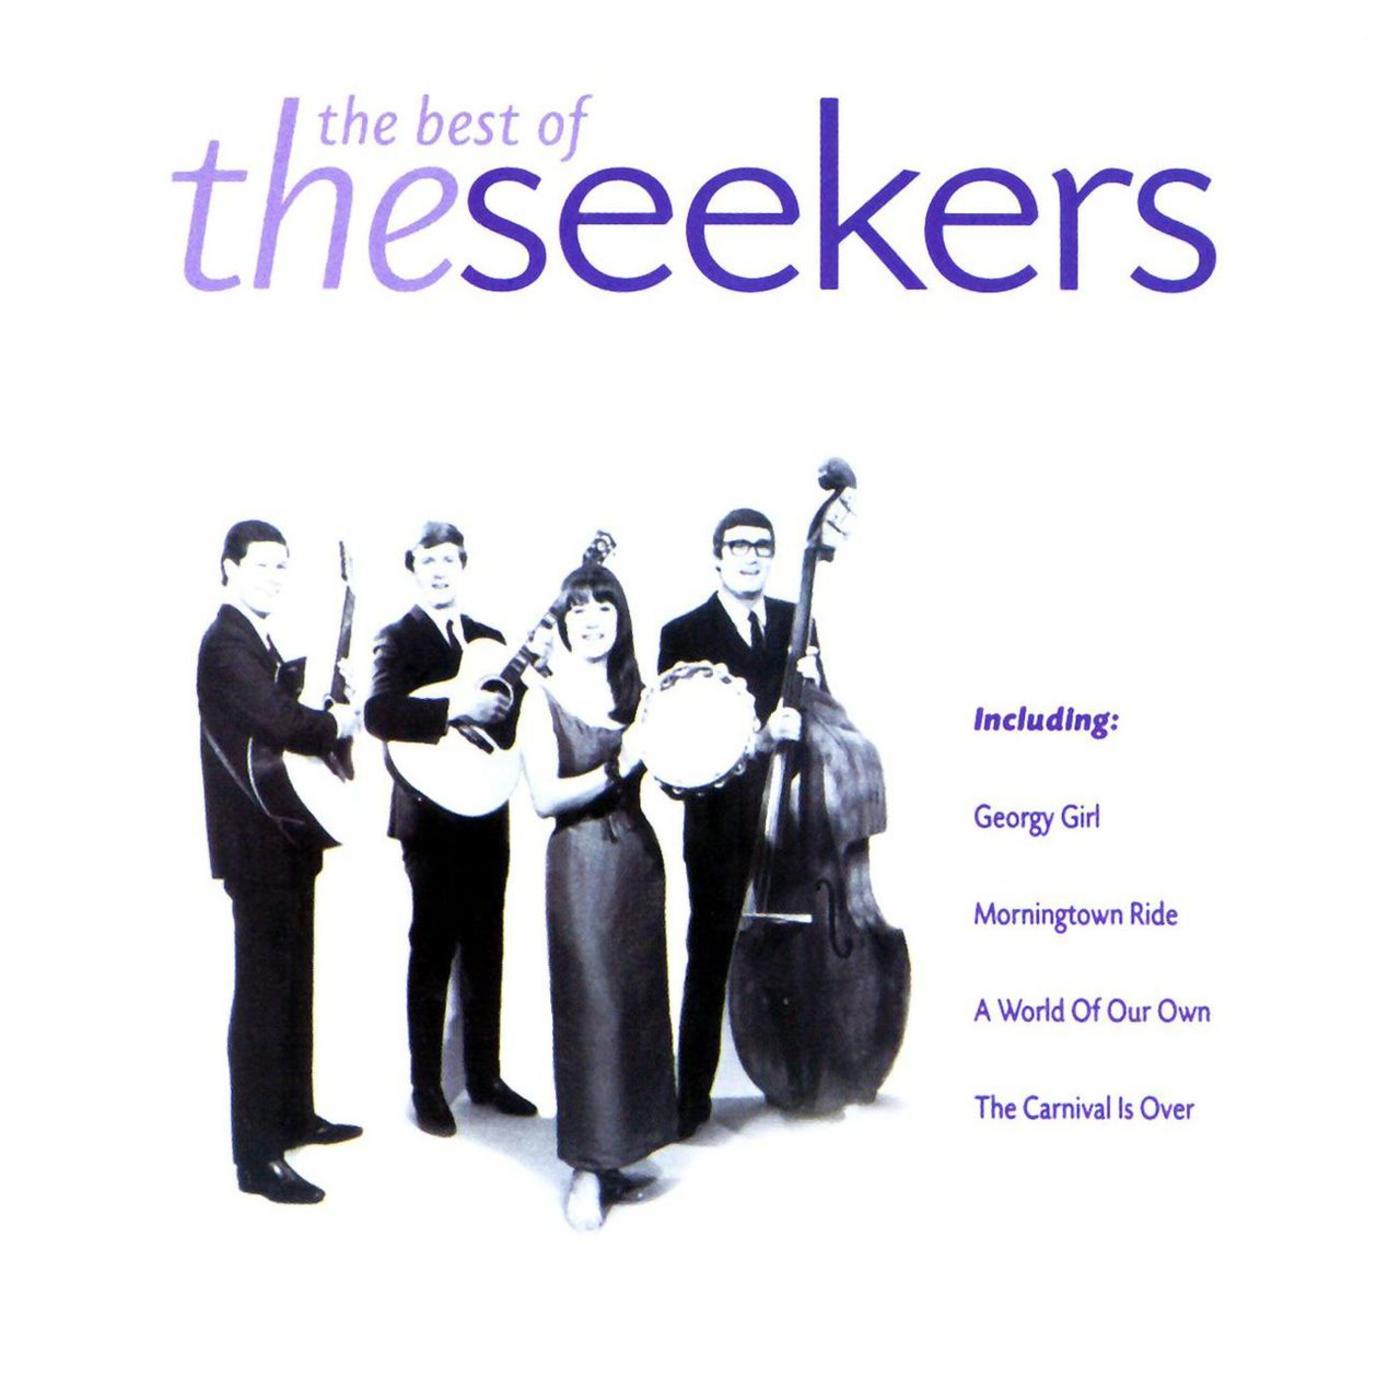 The Best of The Seekers